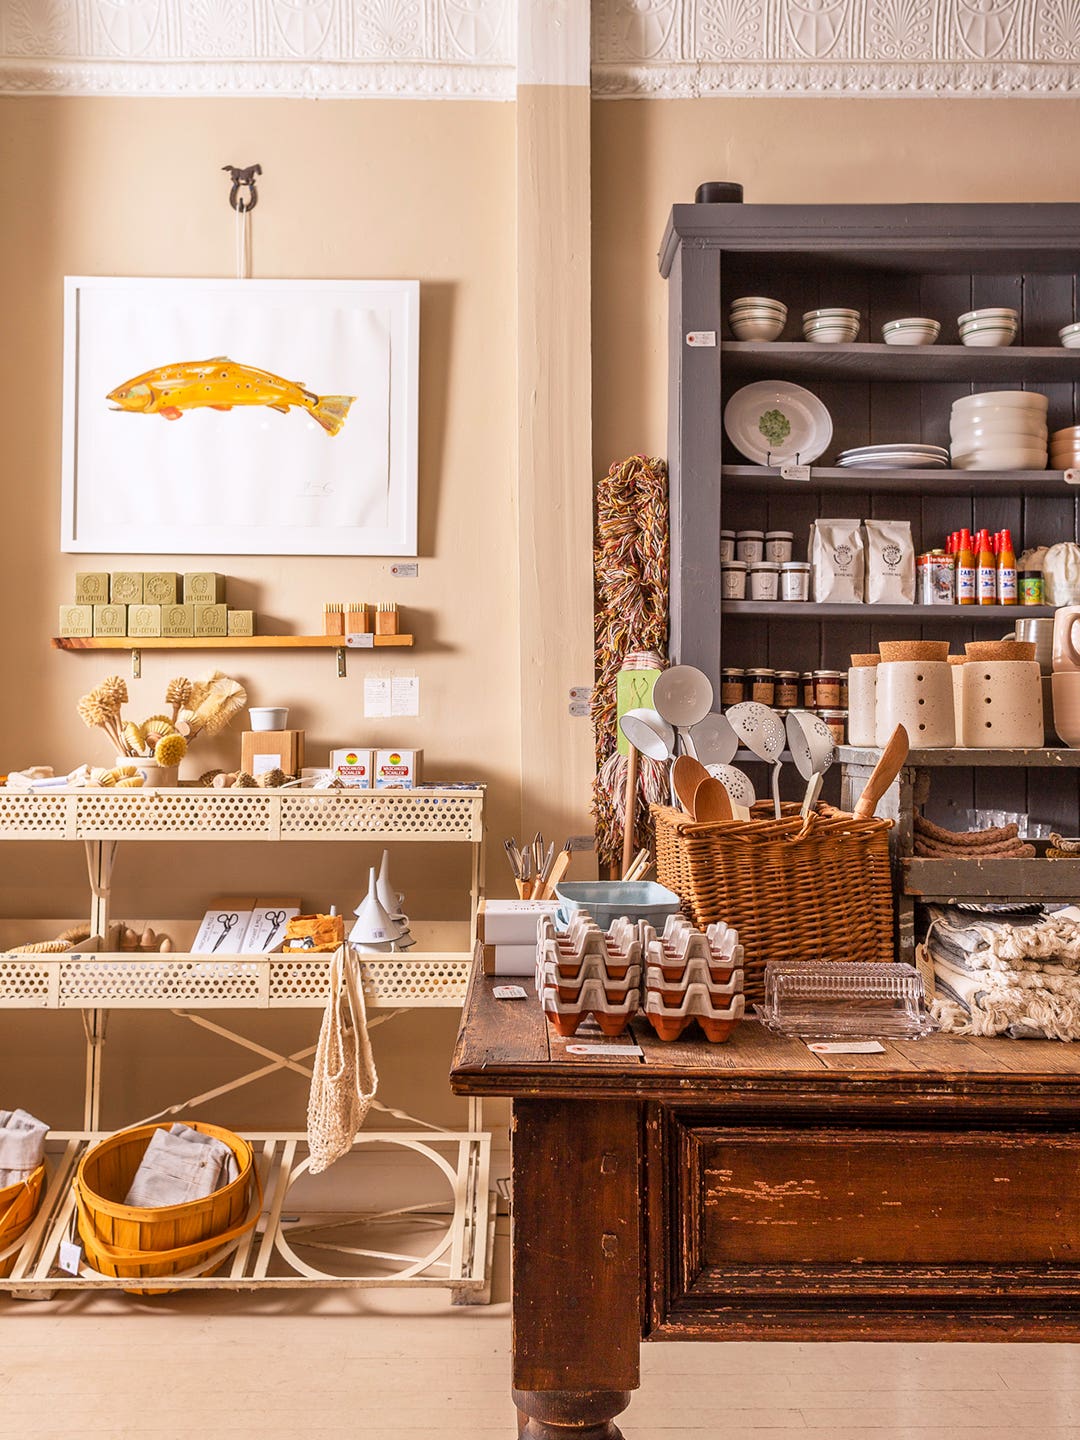 Our Editor-Approved List of the 9 Best Home Stores in Hudson, New York